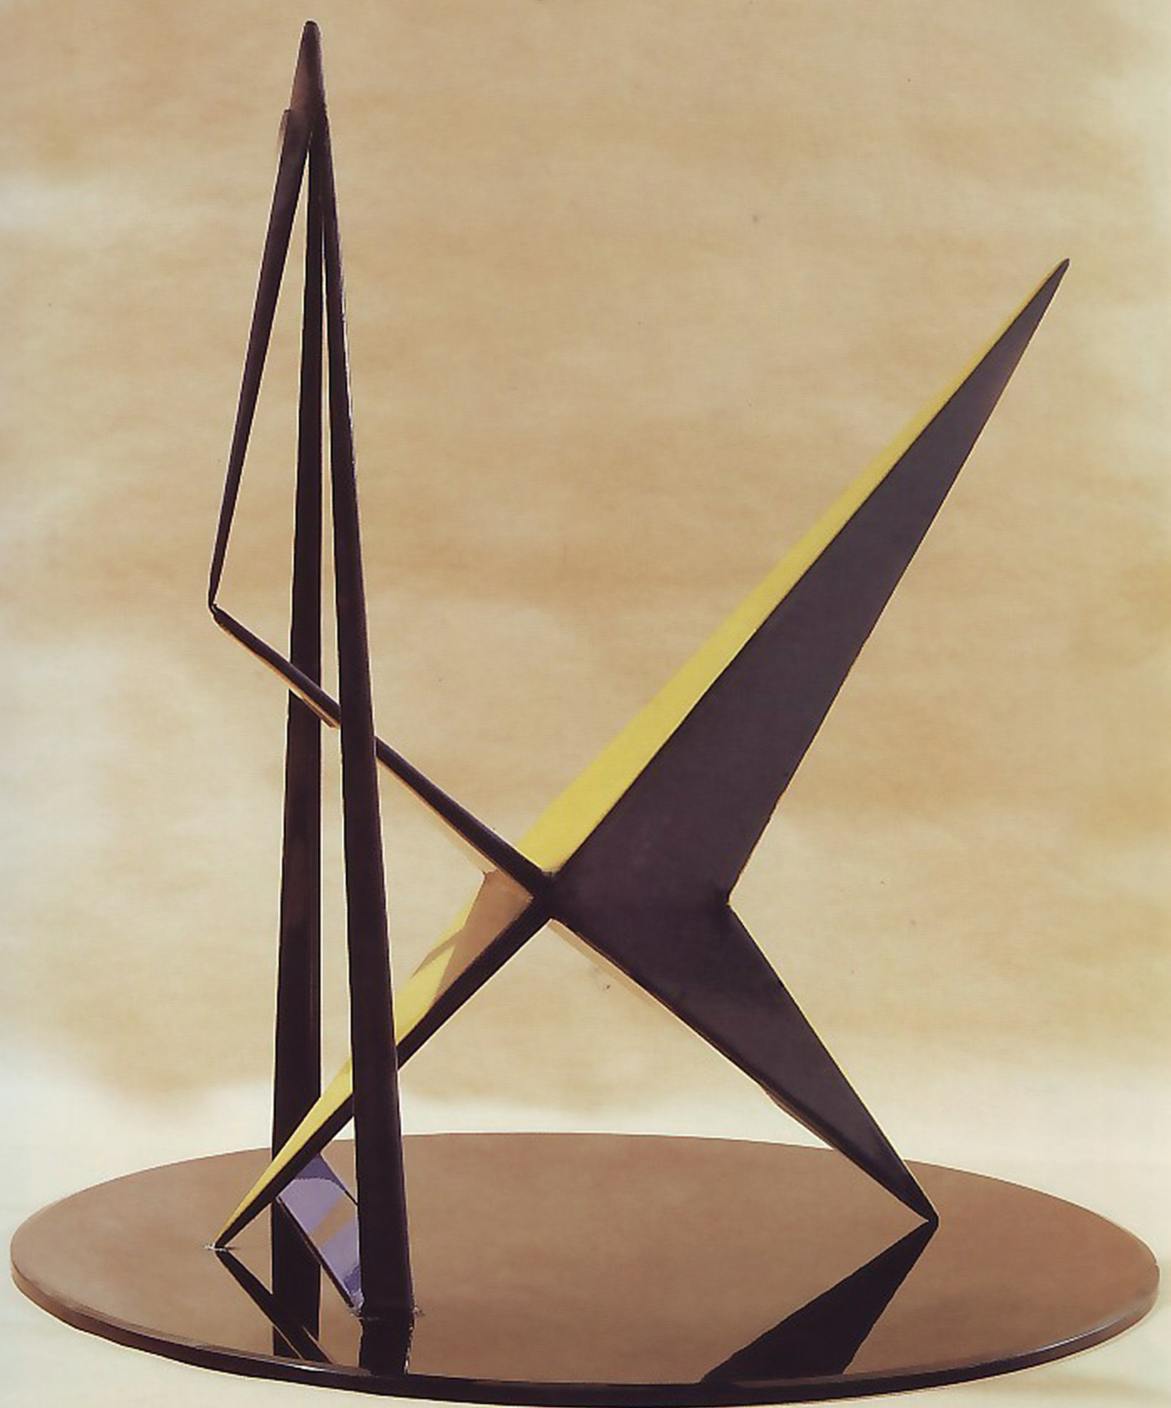 A geometric, metal sculpture painted black and yellow.